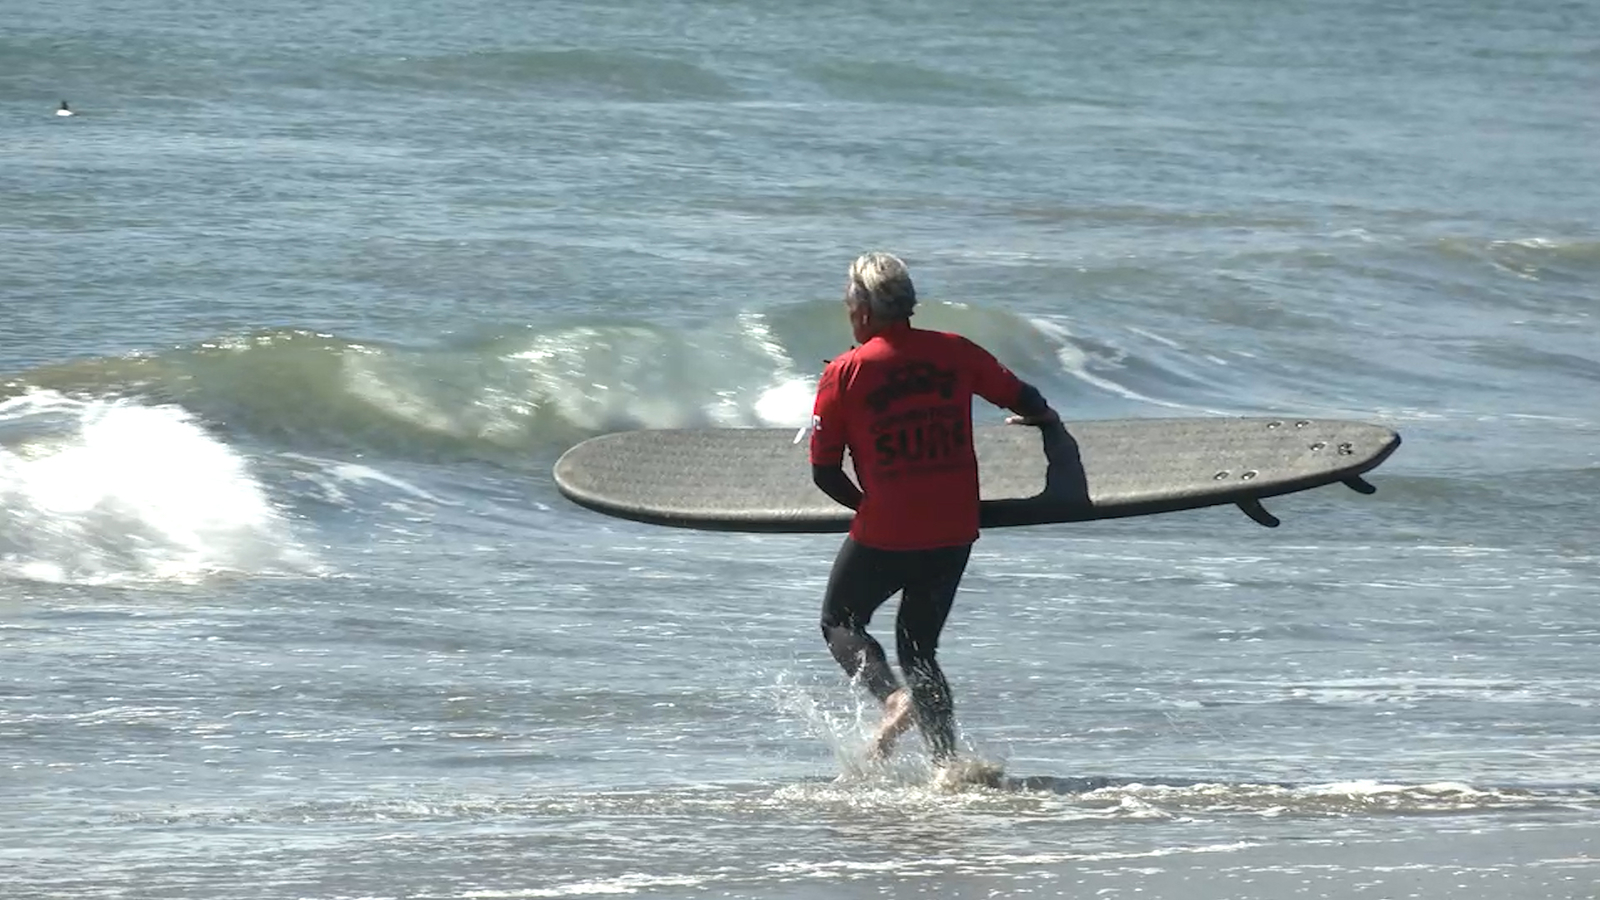 Operation Surf in Santa Cruz is changing lives, one wave at a time [Video]